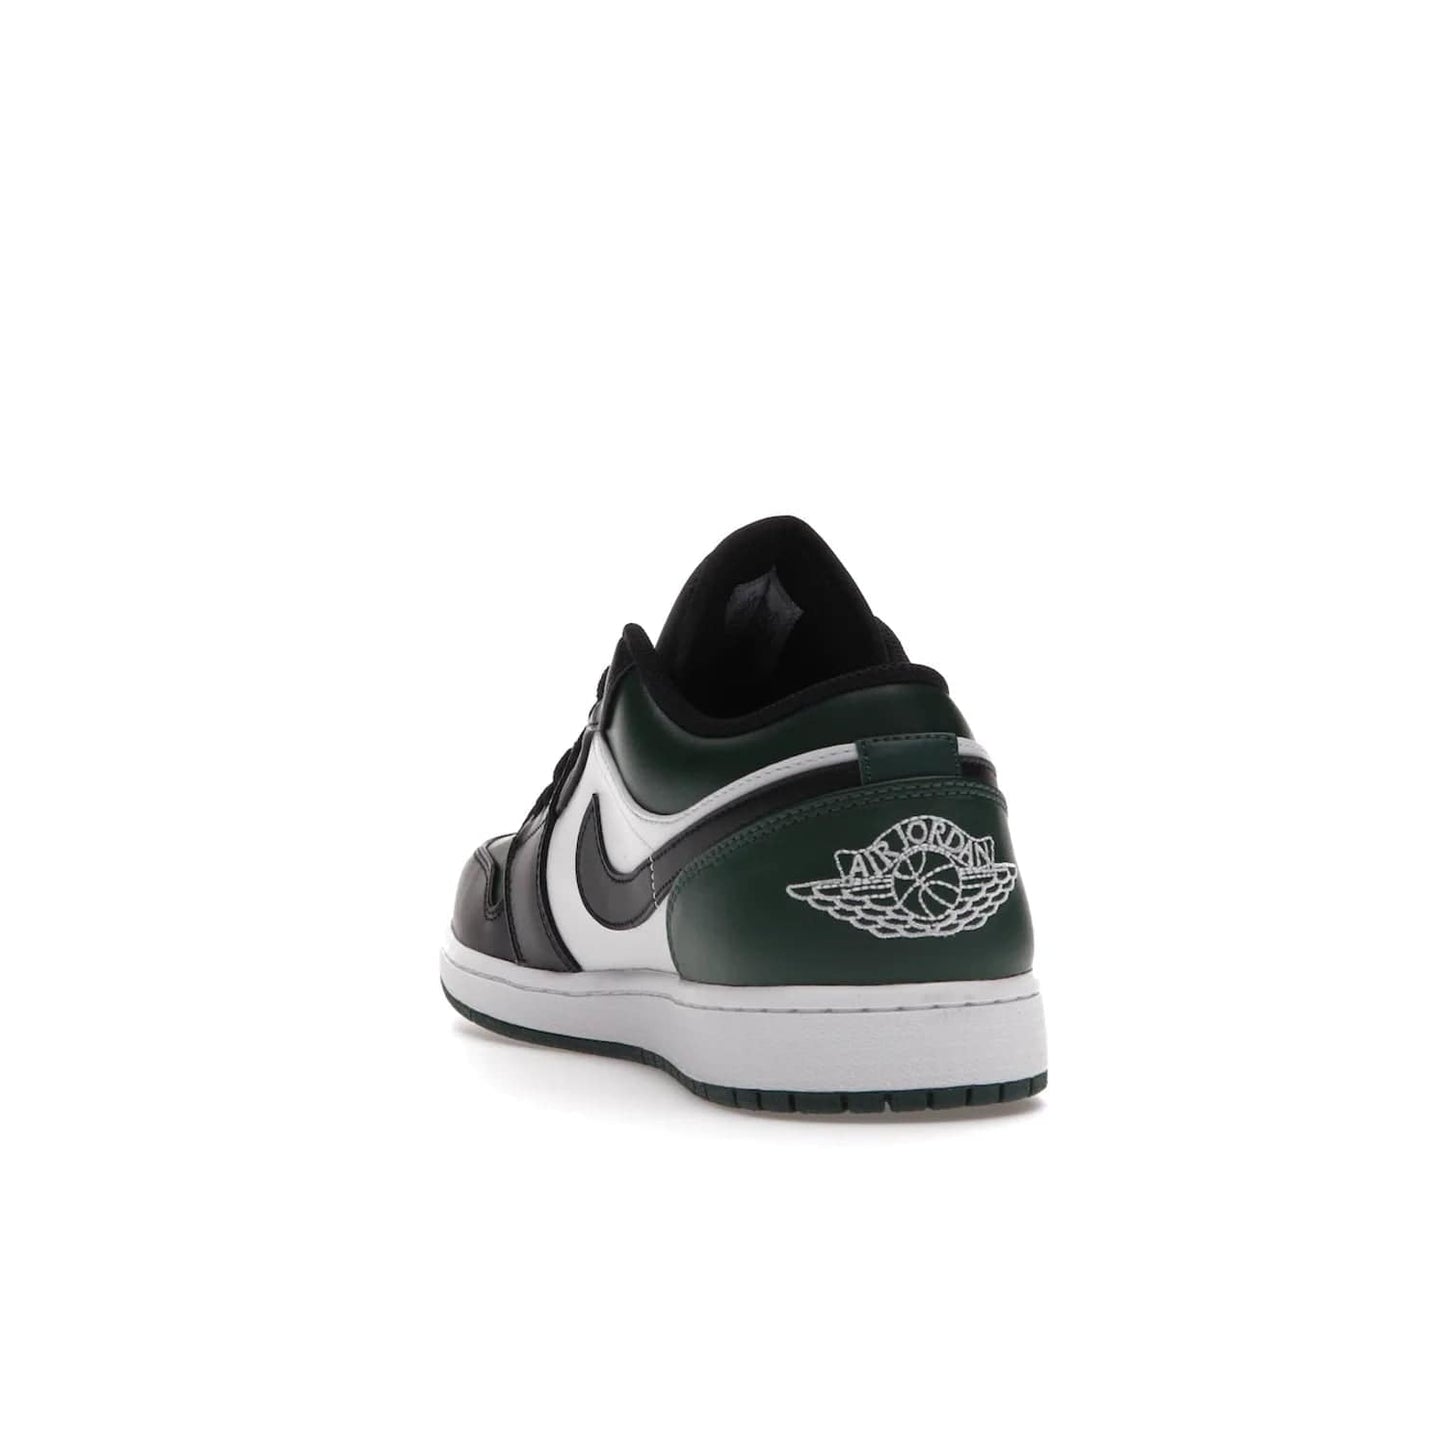 Jordan 1 Low Green Toe - Image 26 - Only at www.BallersClubKickz.com - The Jordan 1 Low Green Toe features white, black and Noble Green leather with black Swoosh. Get the classic Bred Toe-inspired color blocking with green perforated toe box. White and green Air sole completes the design. Released in October 2021 at only $100. Grab your pair now!